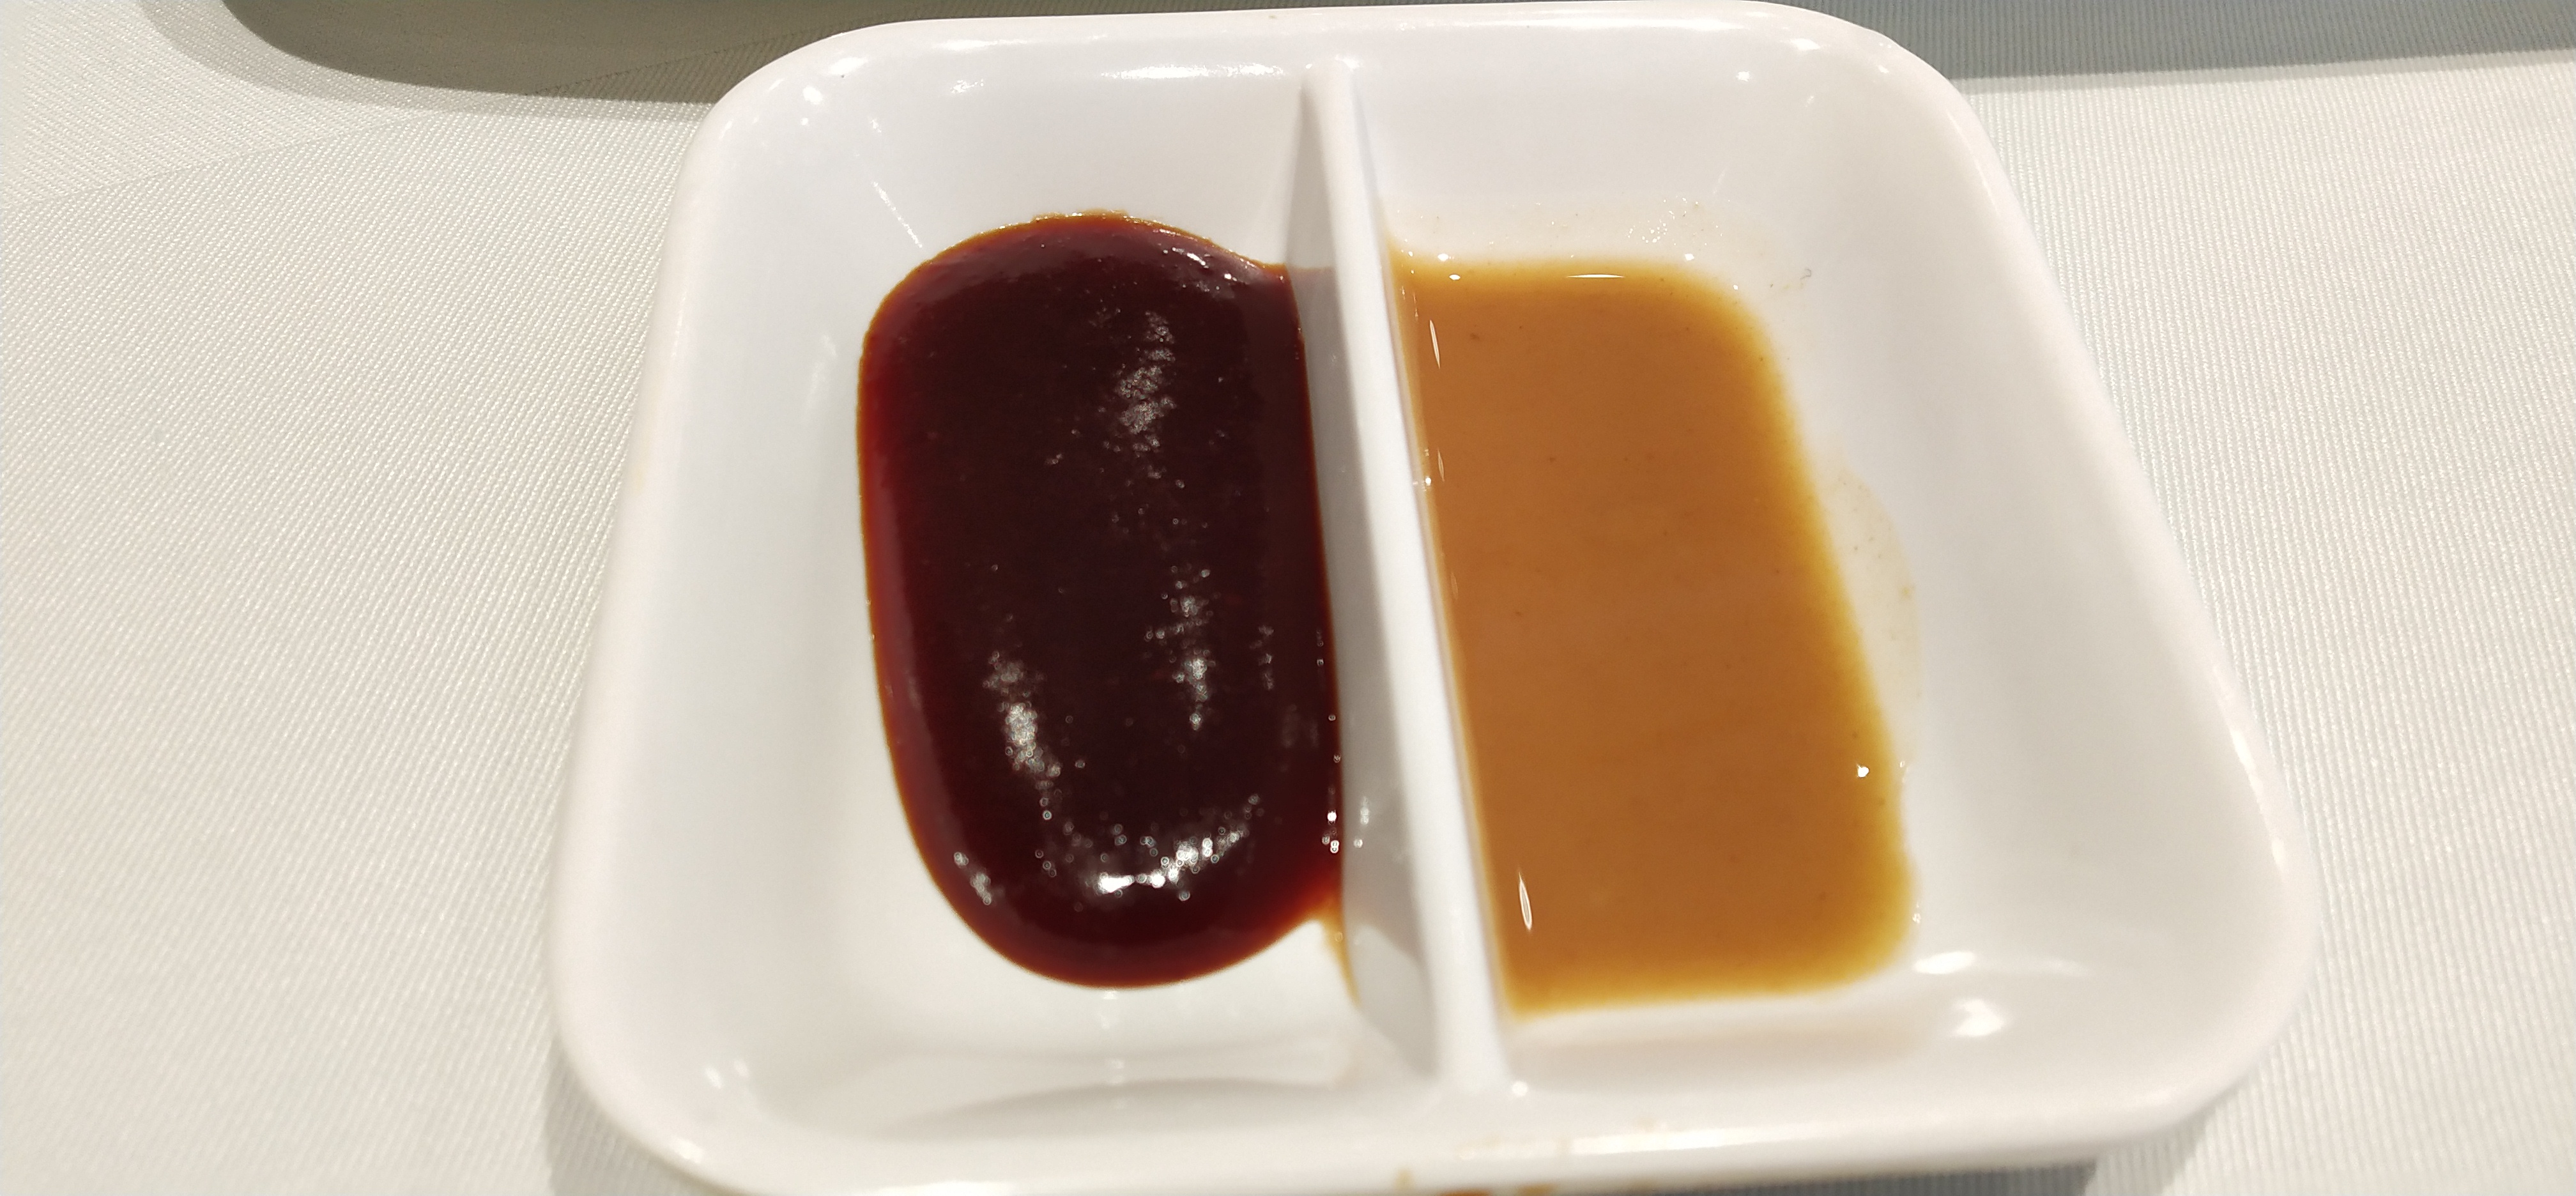 Sweet sauce (red) and sesame sauce